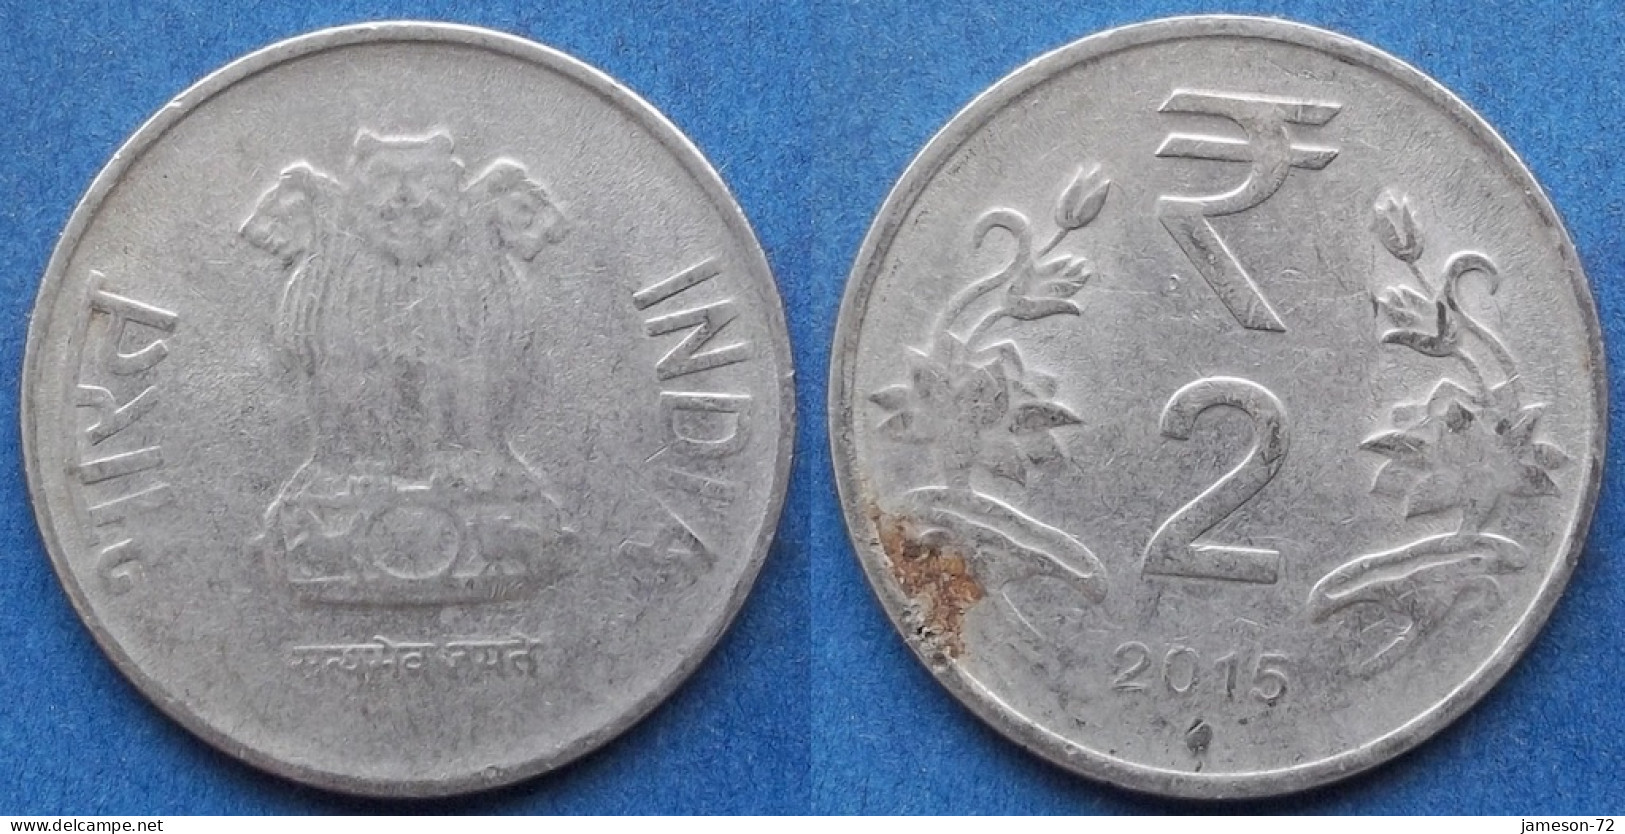 INDIA - 2 Rupees 2015 "Lotus Flowers" KM# 395 Republic Decimal Coinage (1957) - Edelweiss Coins - Georgien